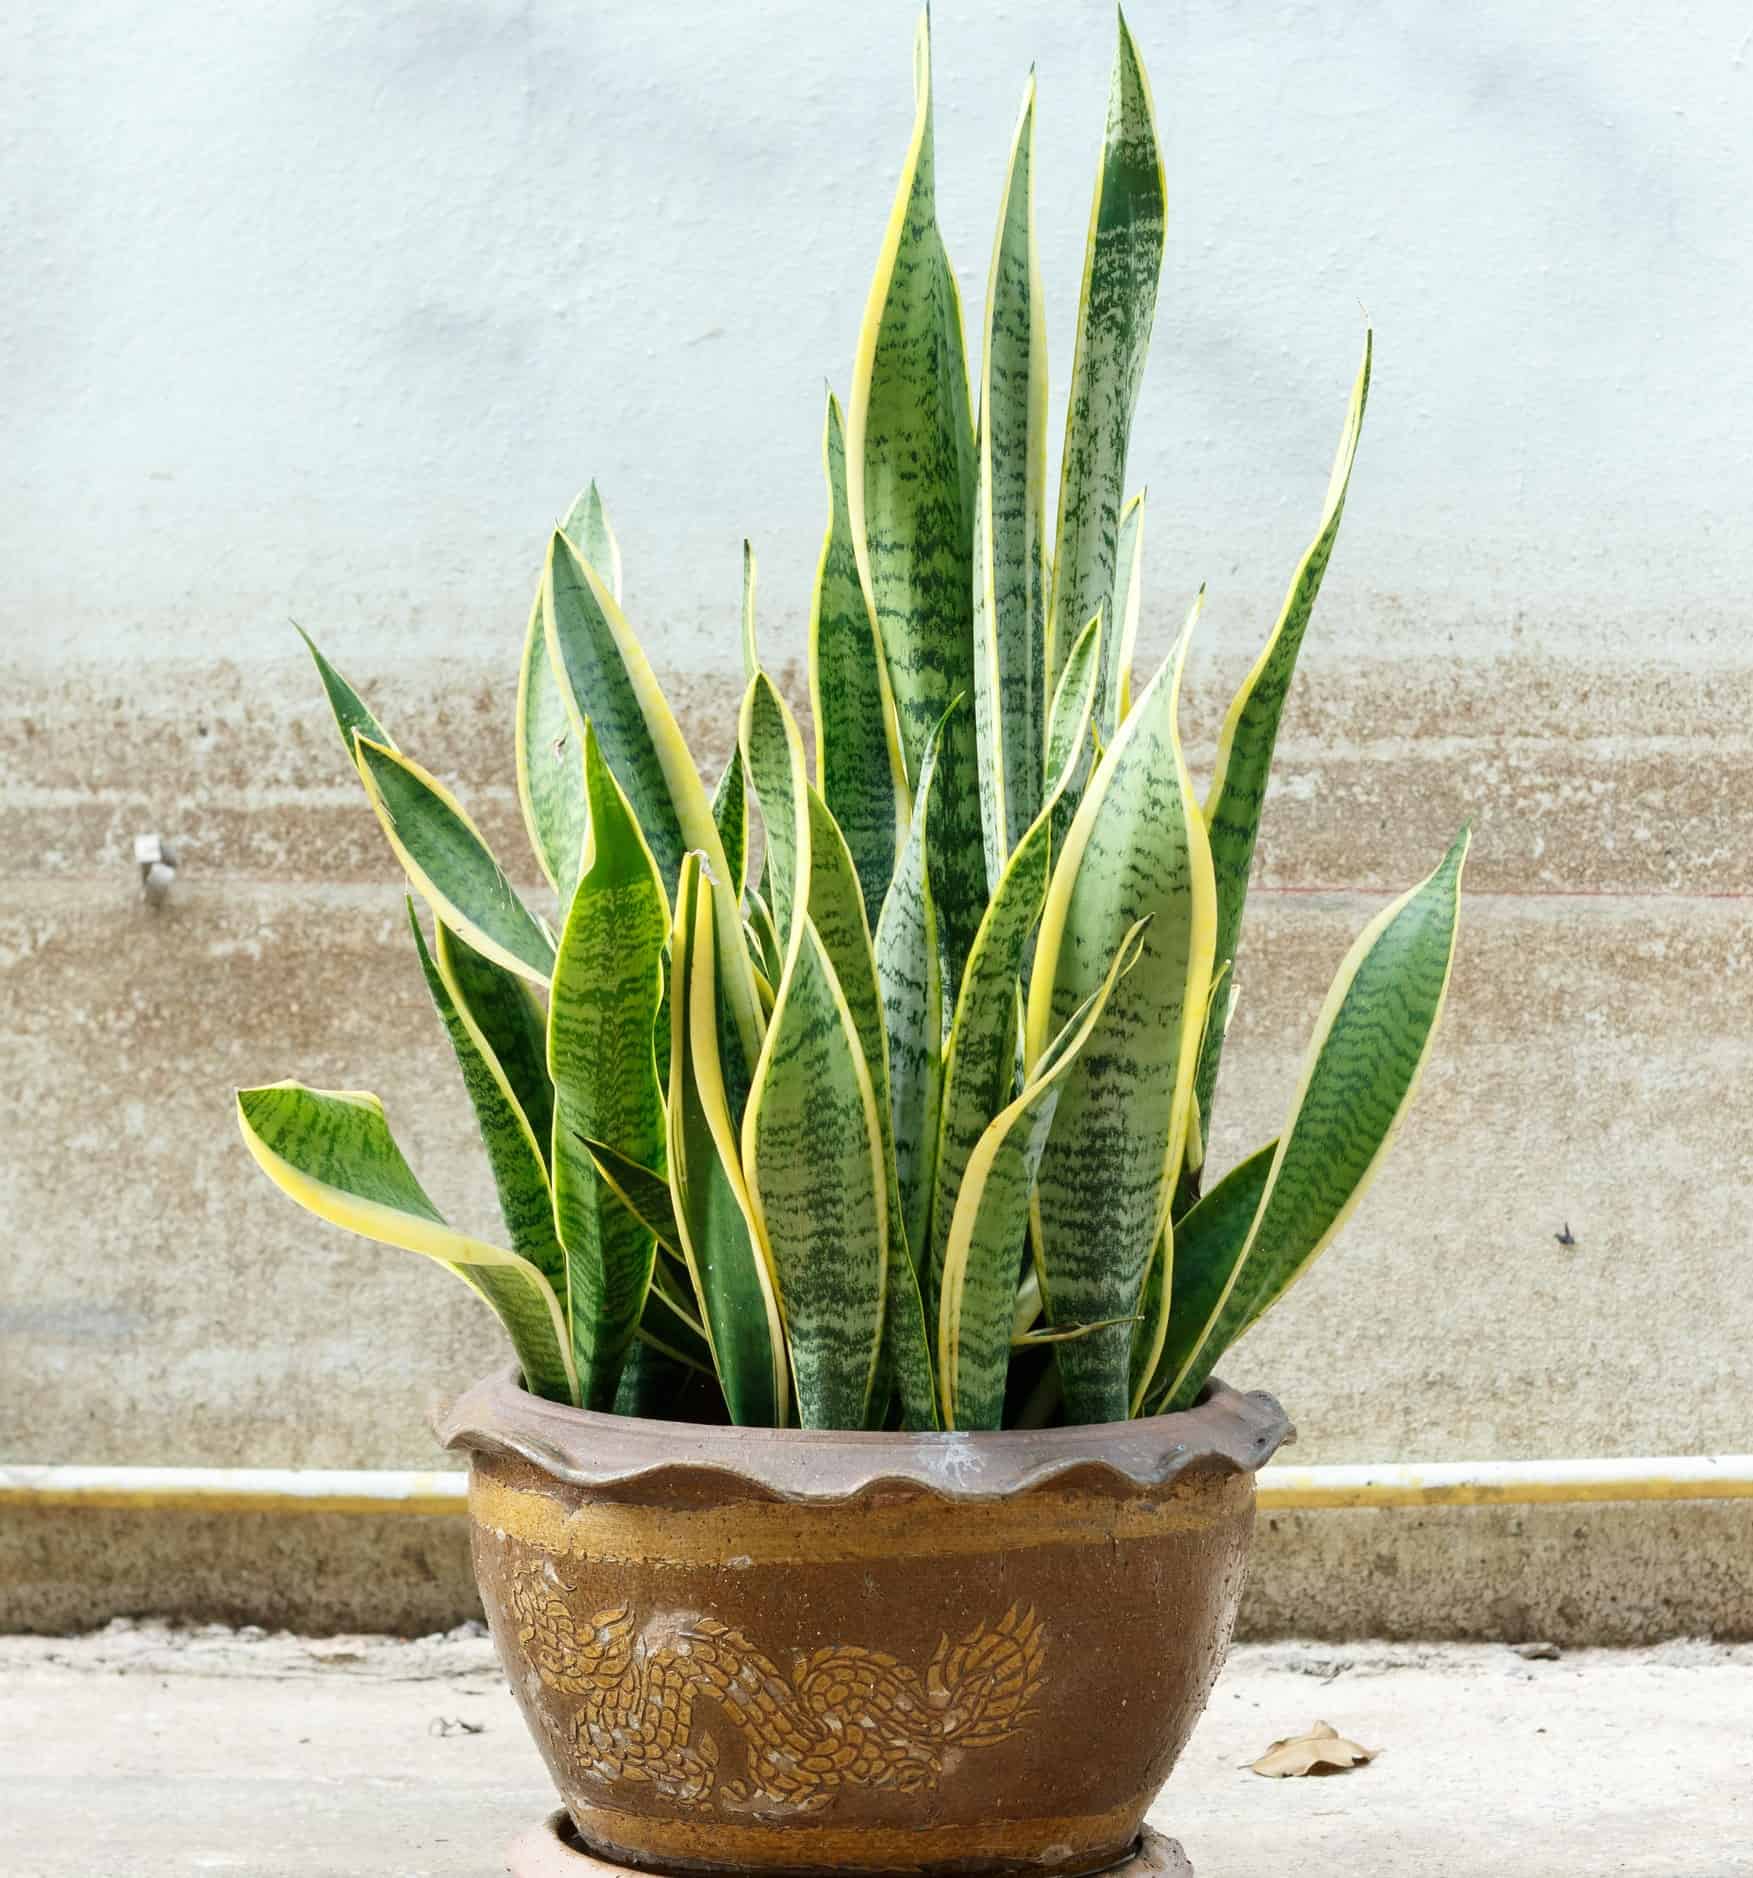 The snake plant has pretty variegated leaves.